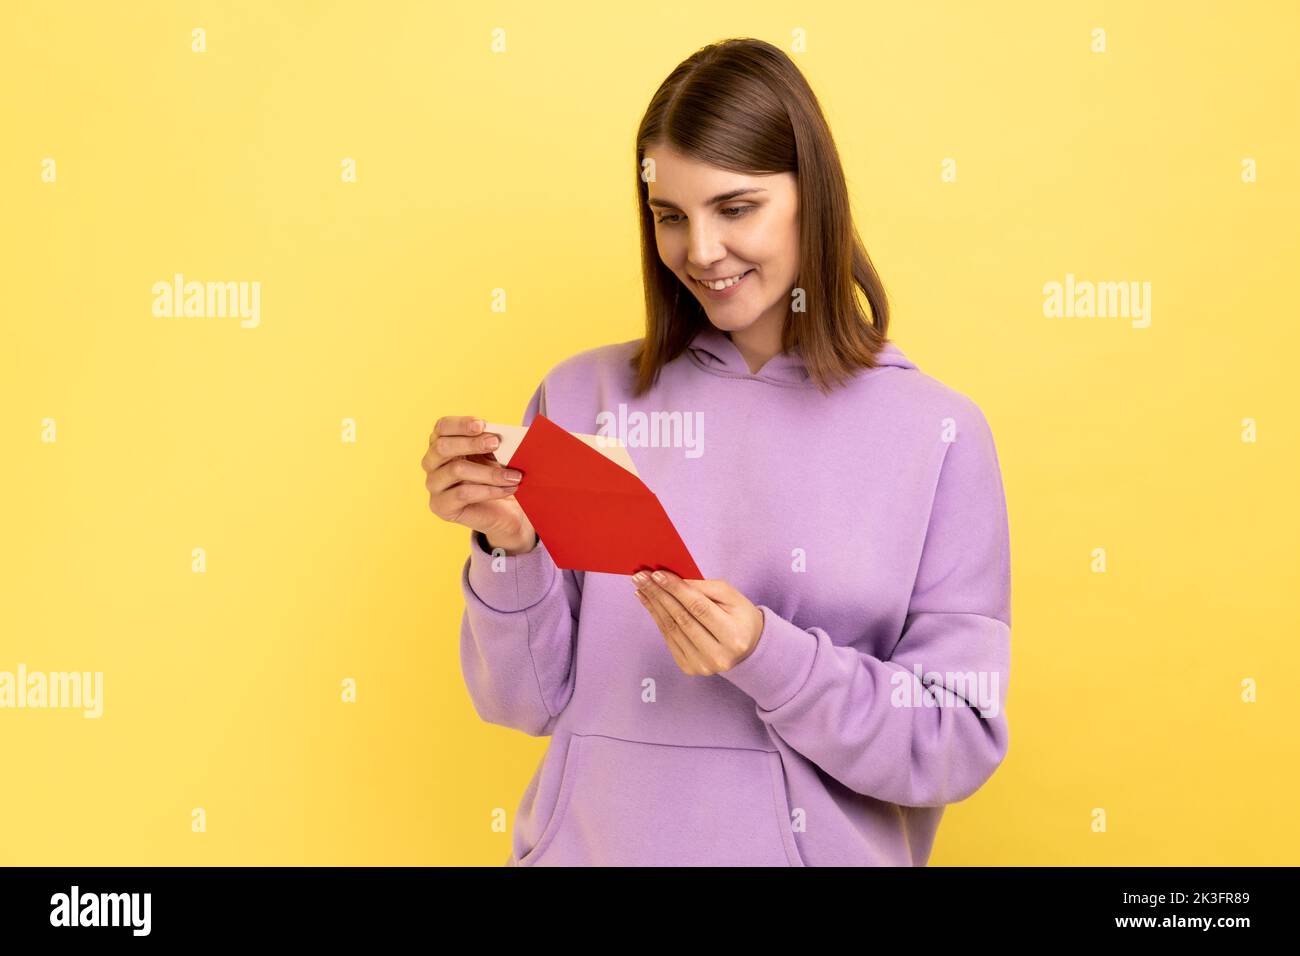 Side view of smiling young woman opening envelope and reading letter, with positive expression, got unexpected pleasant news, wearing purple hoodie. Indoor studio shot isolated on yellow background. Stock Photo